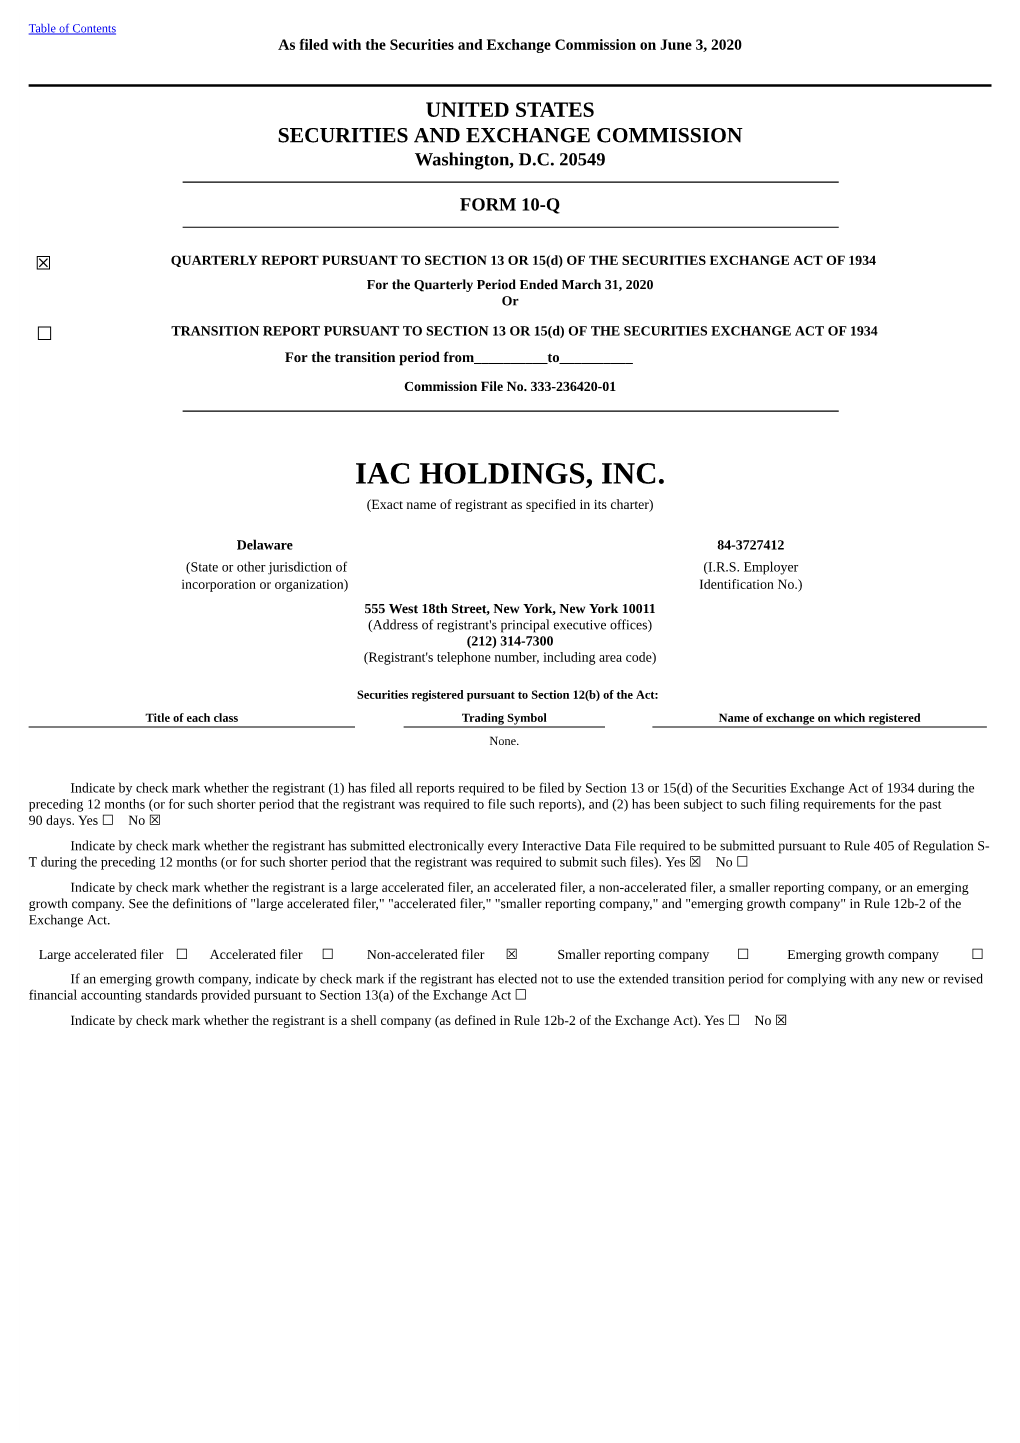 IAC HOLDINGS, INC. (Exact Name of Registrant As Specified in Its Charter)